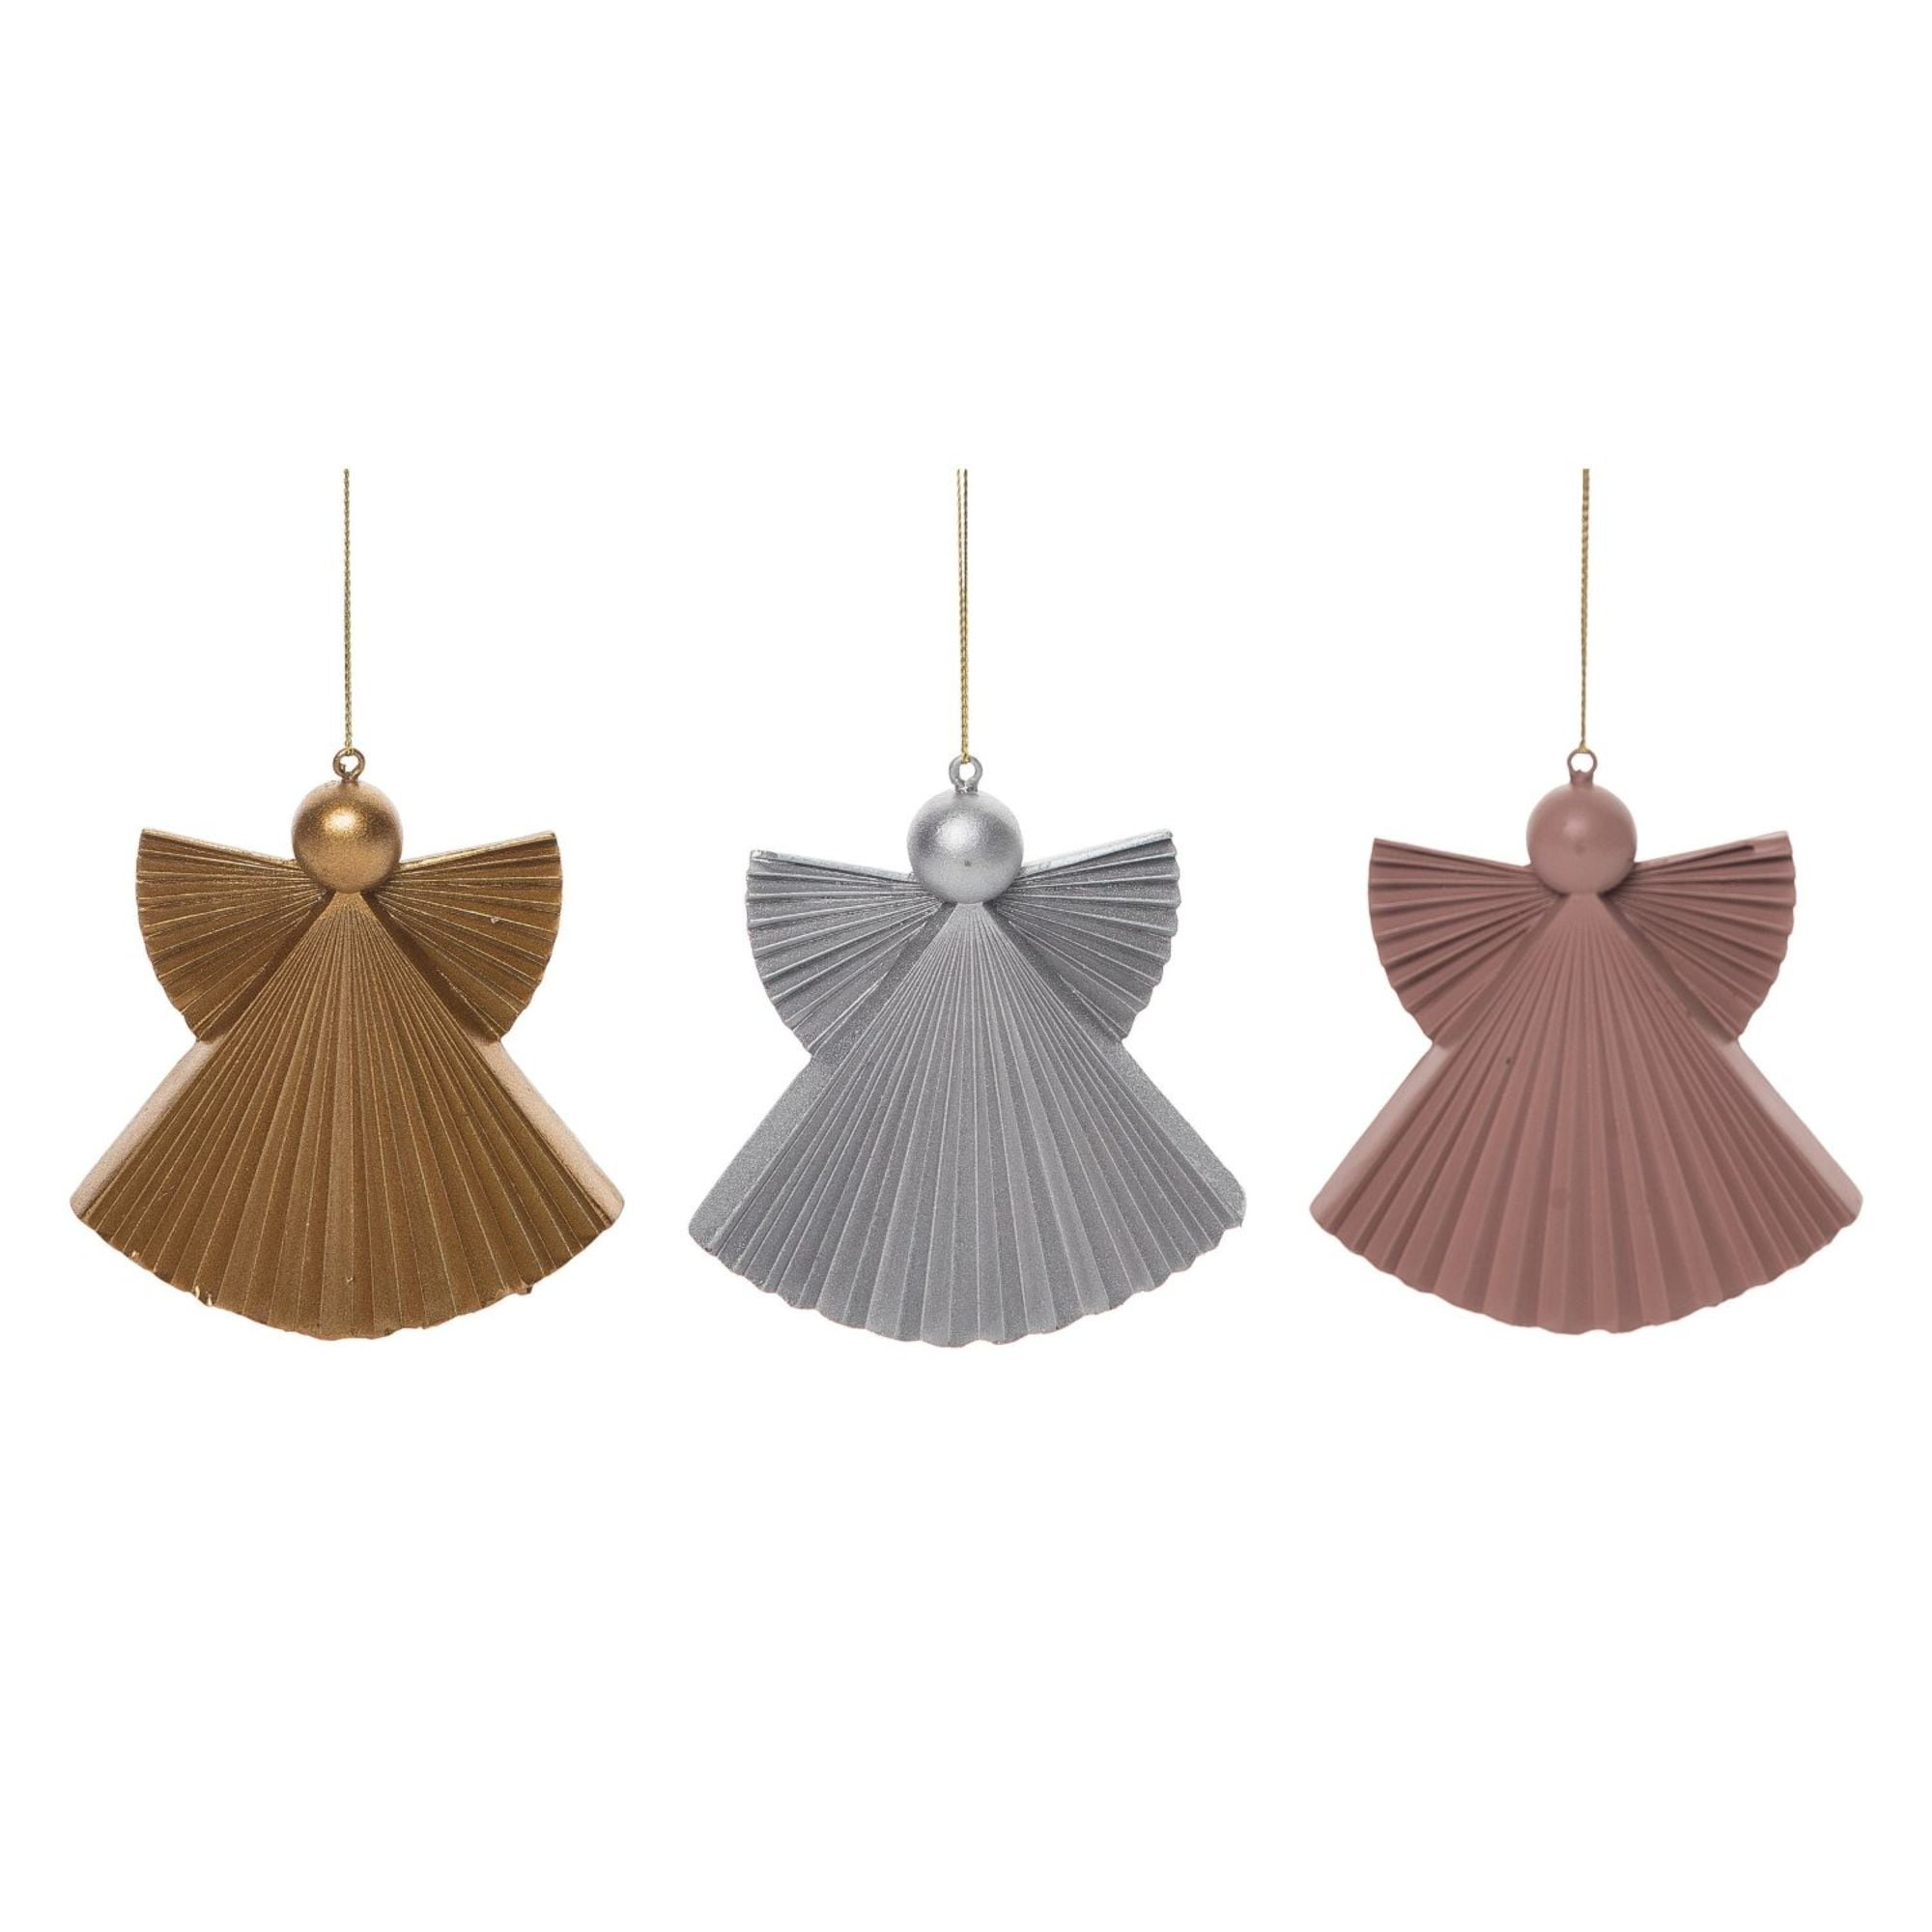 Contemporary Home Living Set of 3 Fold Style Paper Angels